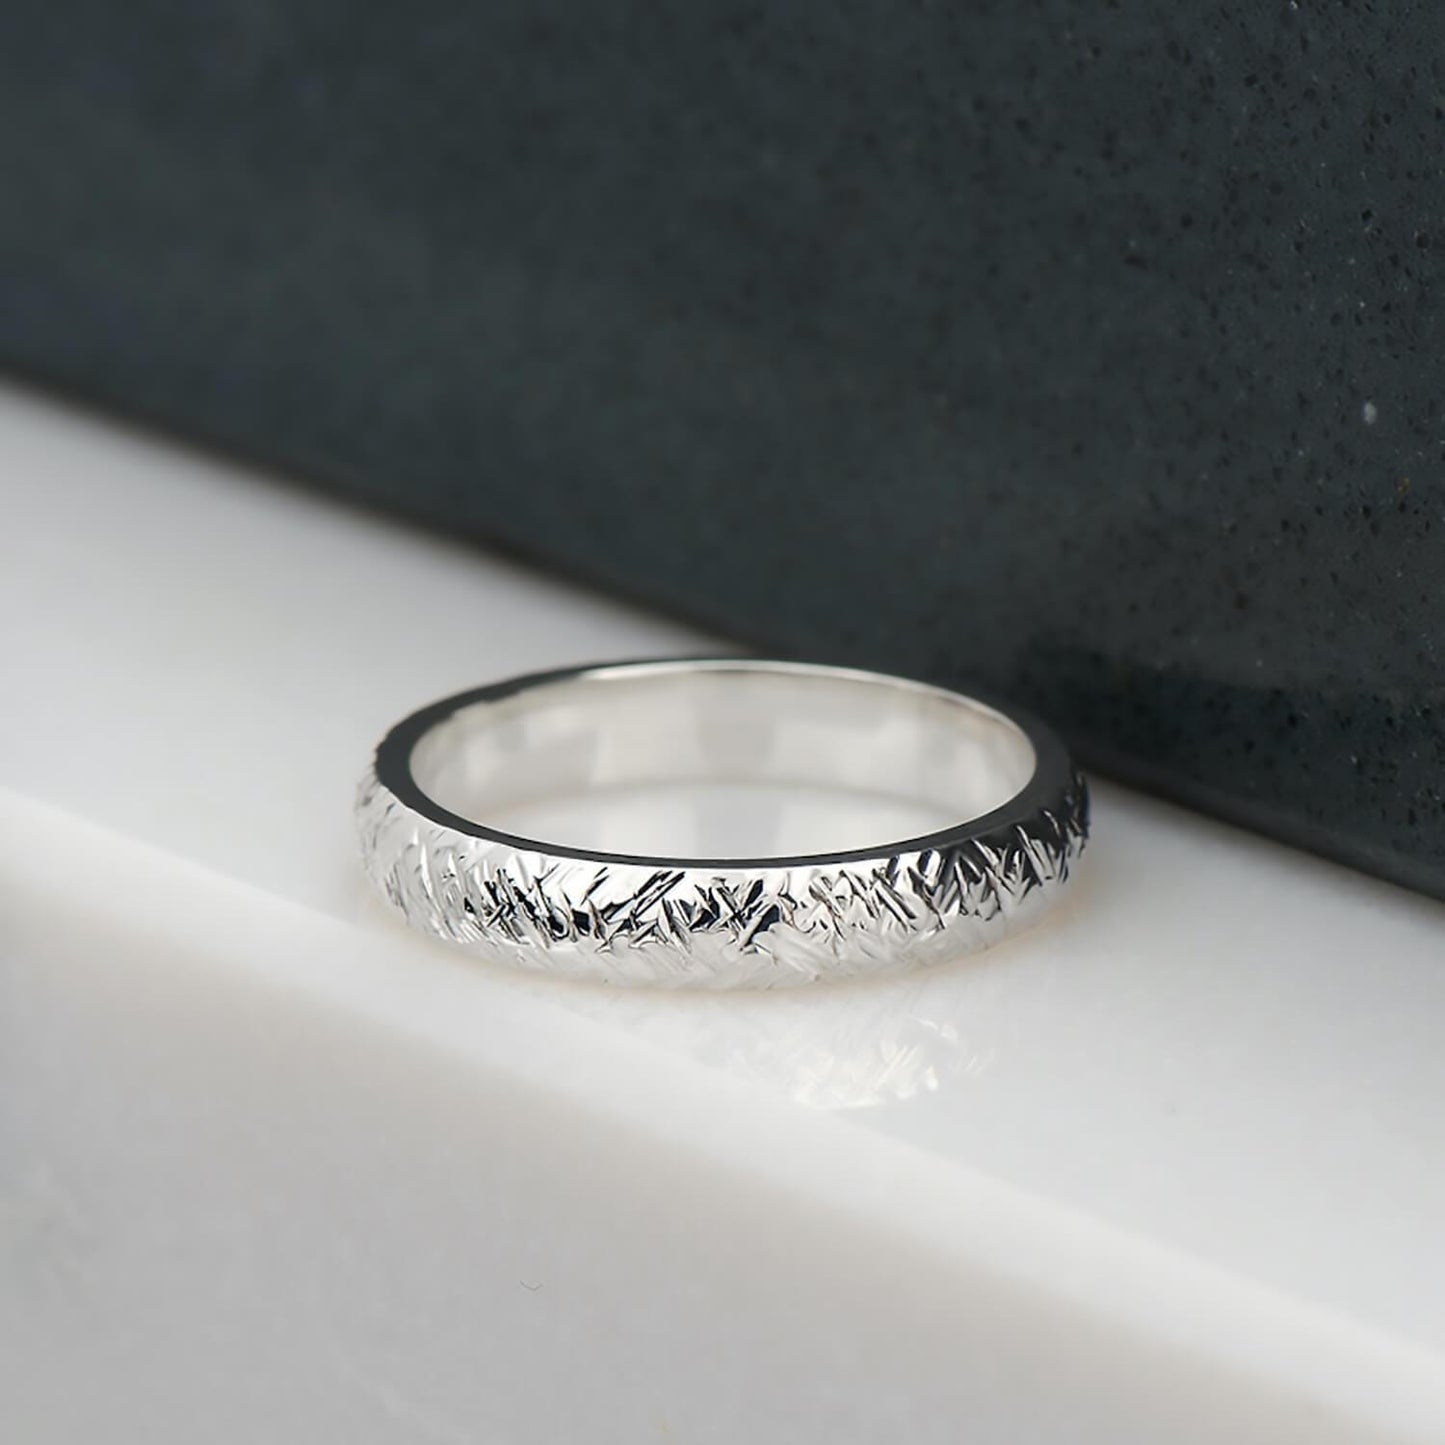 Cross hatch hammer textured and polished ring in recycled sterling silver.